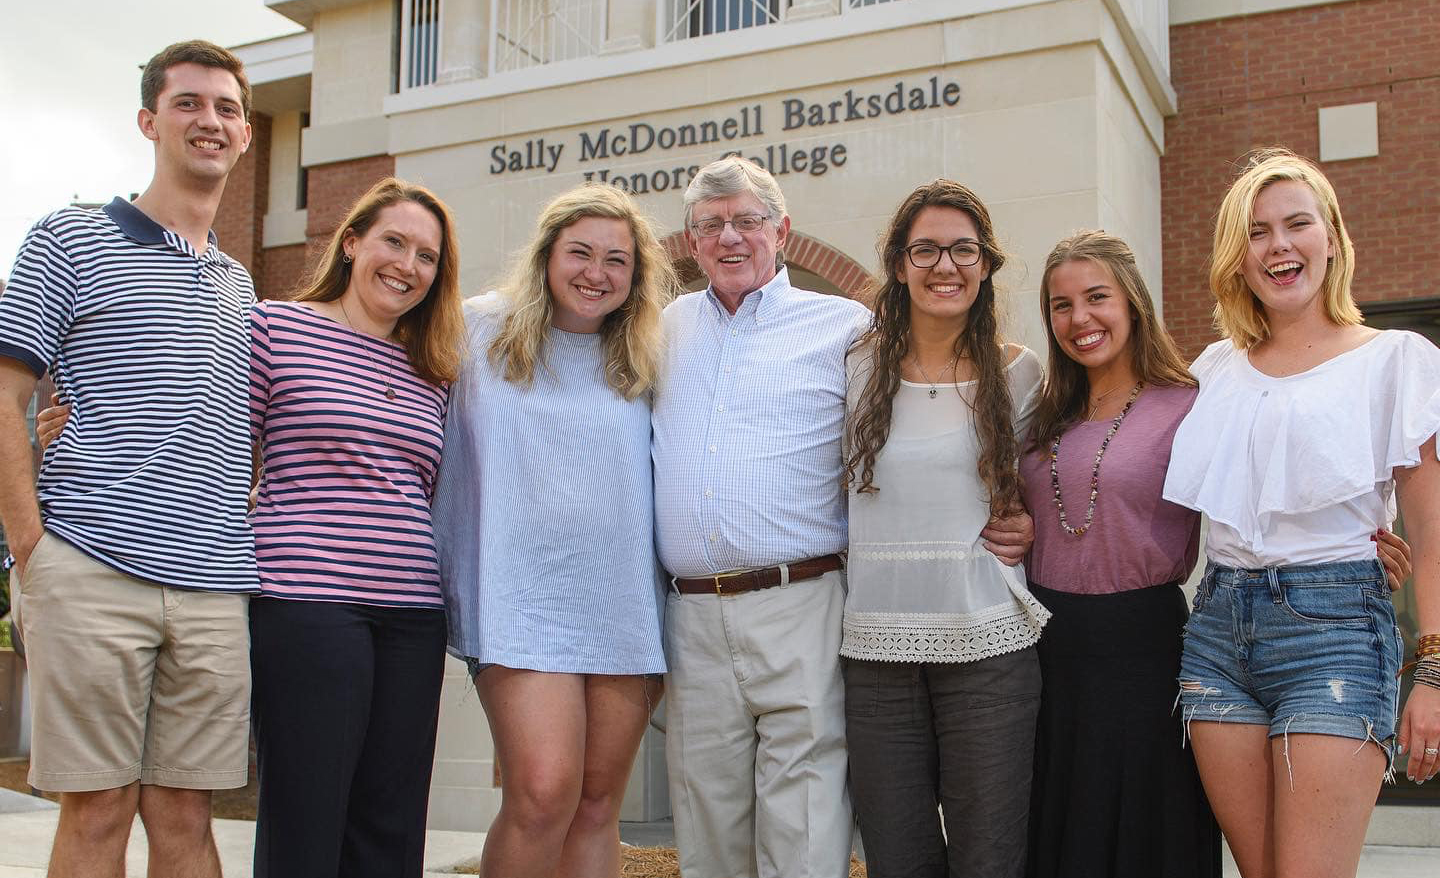 John Winkle (center) hangs out with several of his students in the Sally McDonnell Barksdale Honors College. Winkle’s students across campus are remembering how the late professor of political science both challenged and encouraged them. Photo by Thomas Graning/Ole Miss Digital Imaging Services